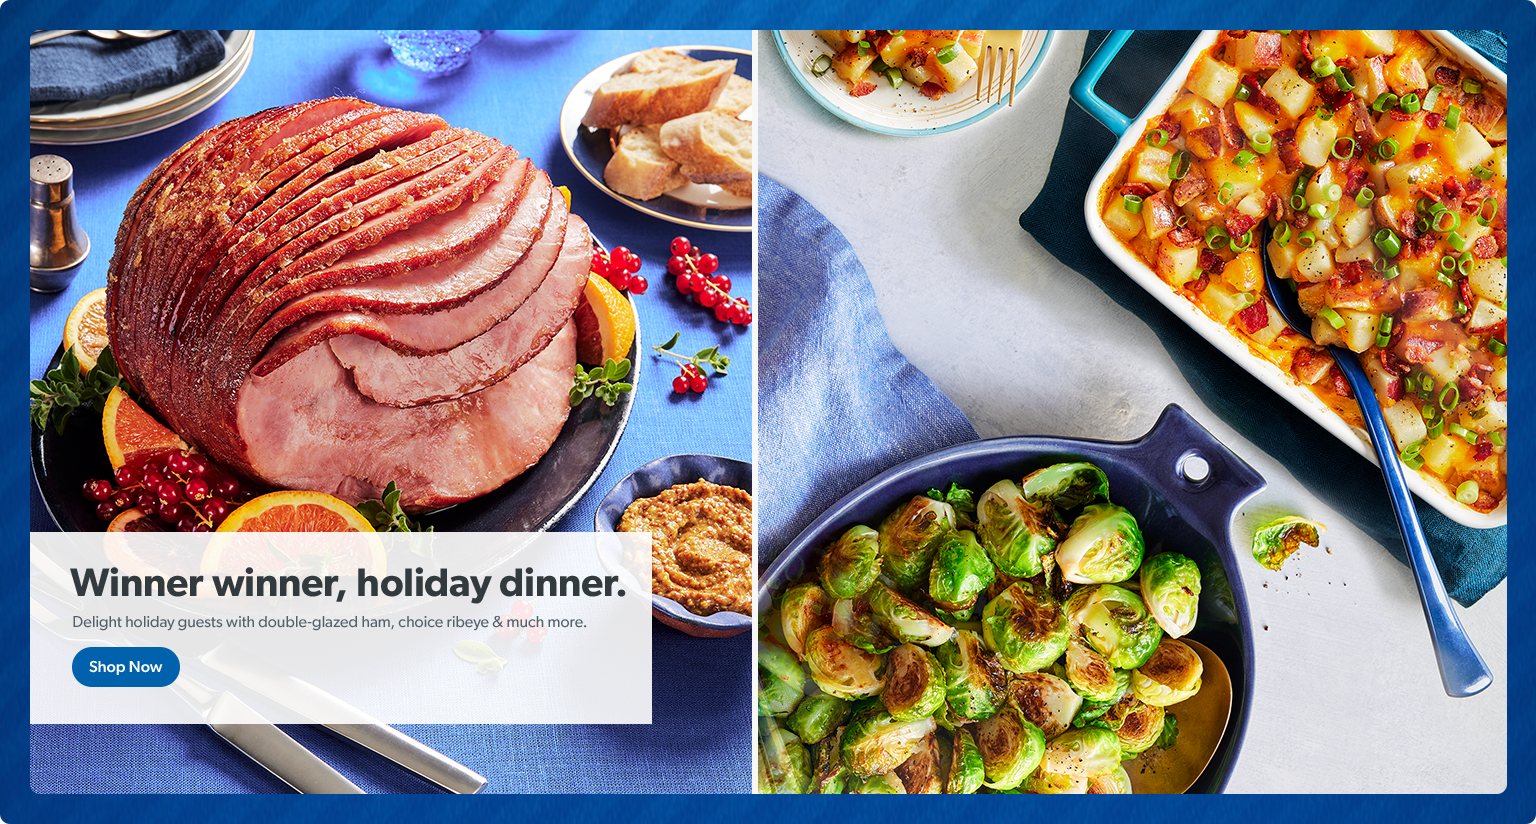 Winner winner, holiday dinner. Delight holiday guests with double glazed ham, choice ribeye and much more. Shop Now. 